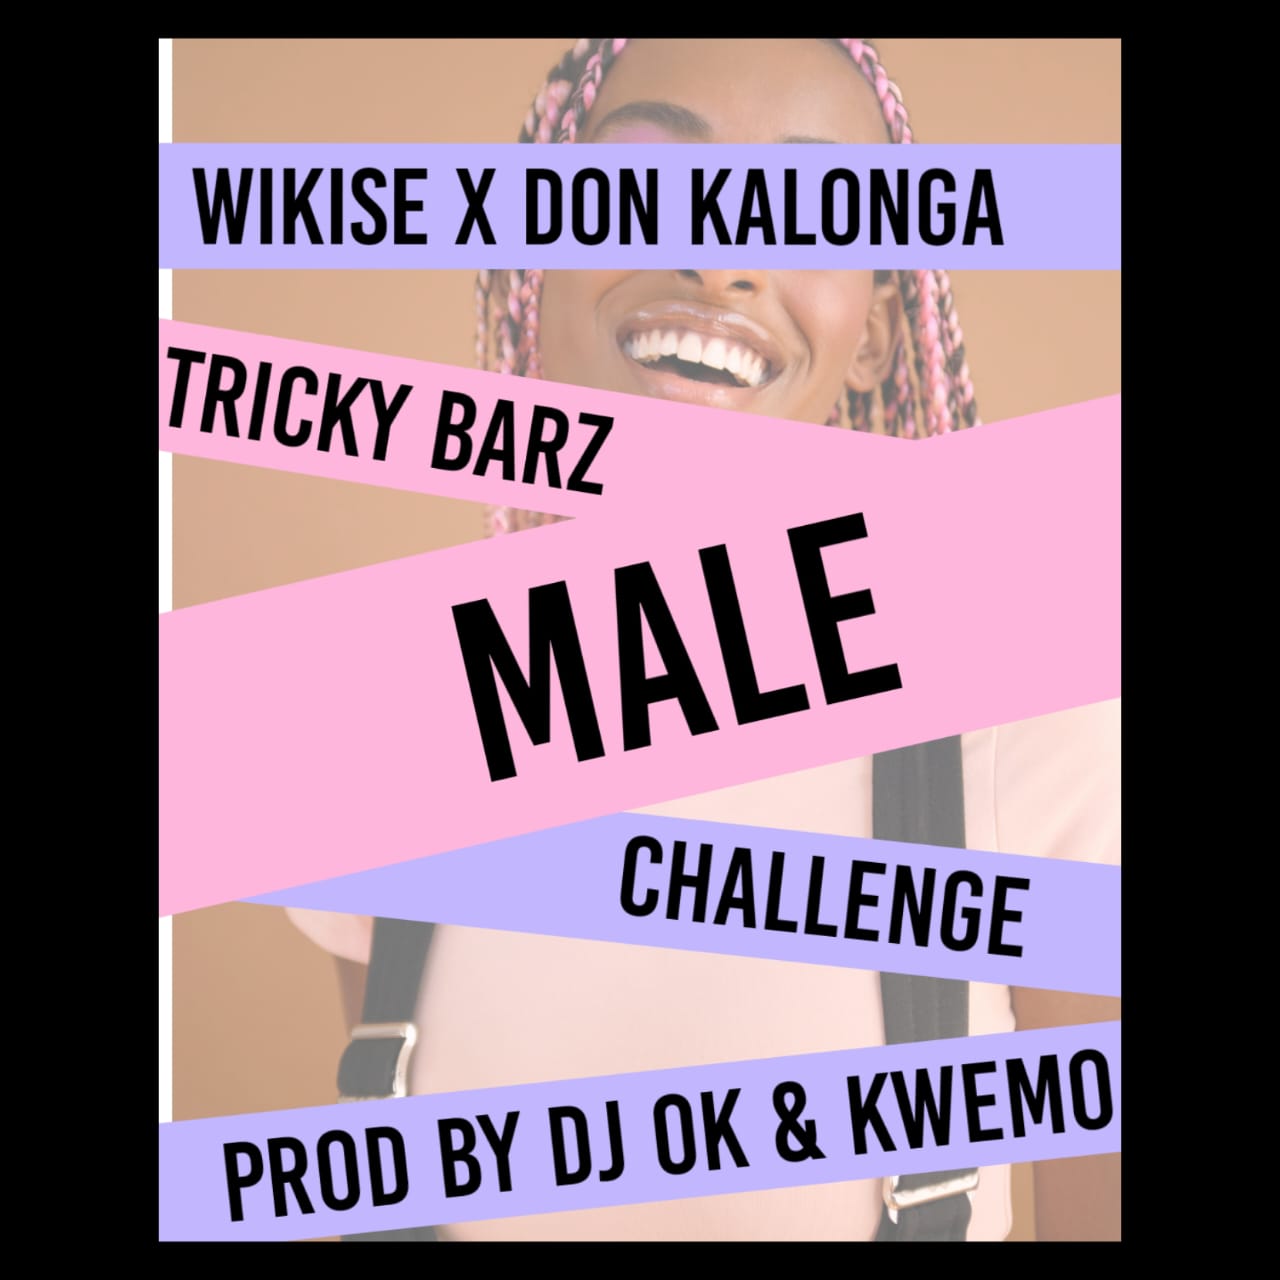 Tricky-Barz-Wikise-male-Challenge-prod-by-kwemo-in-the-mix